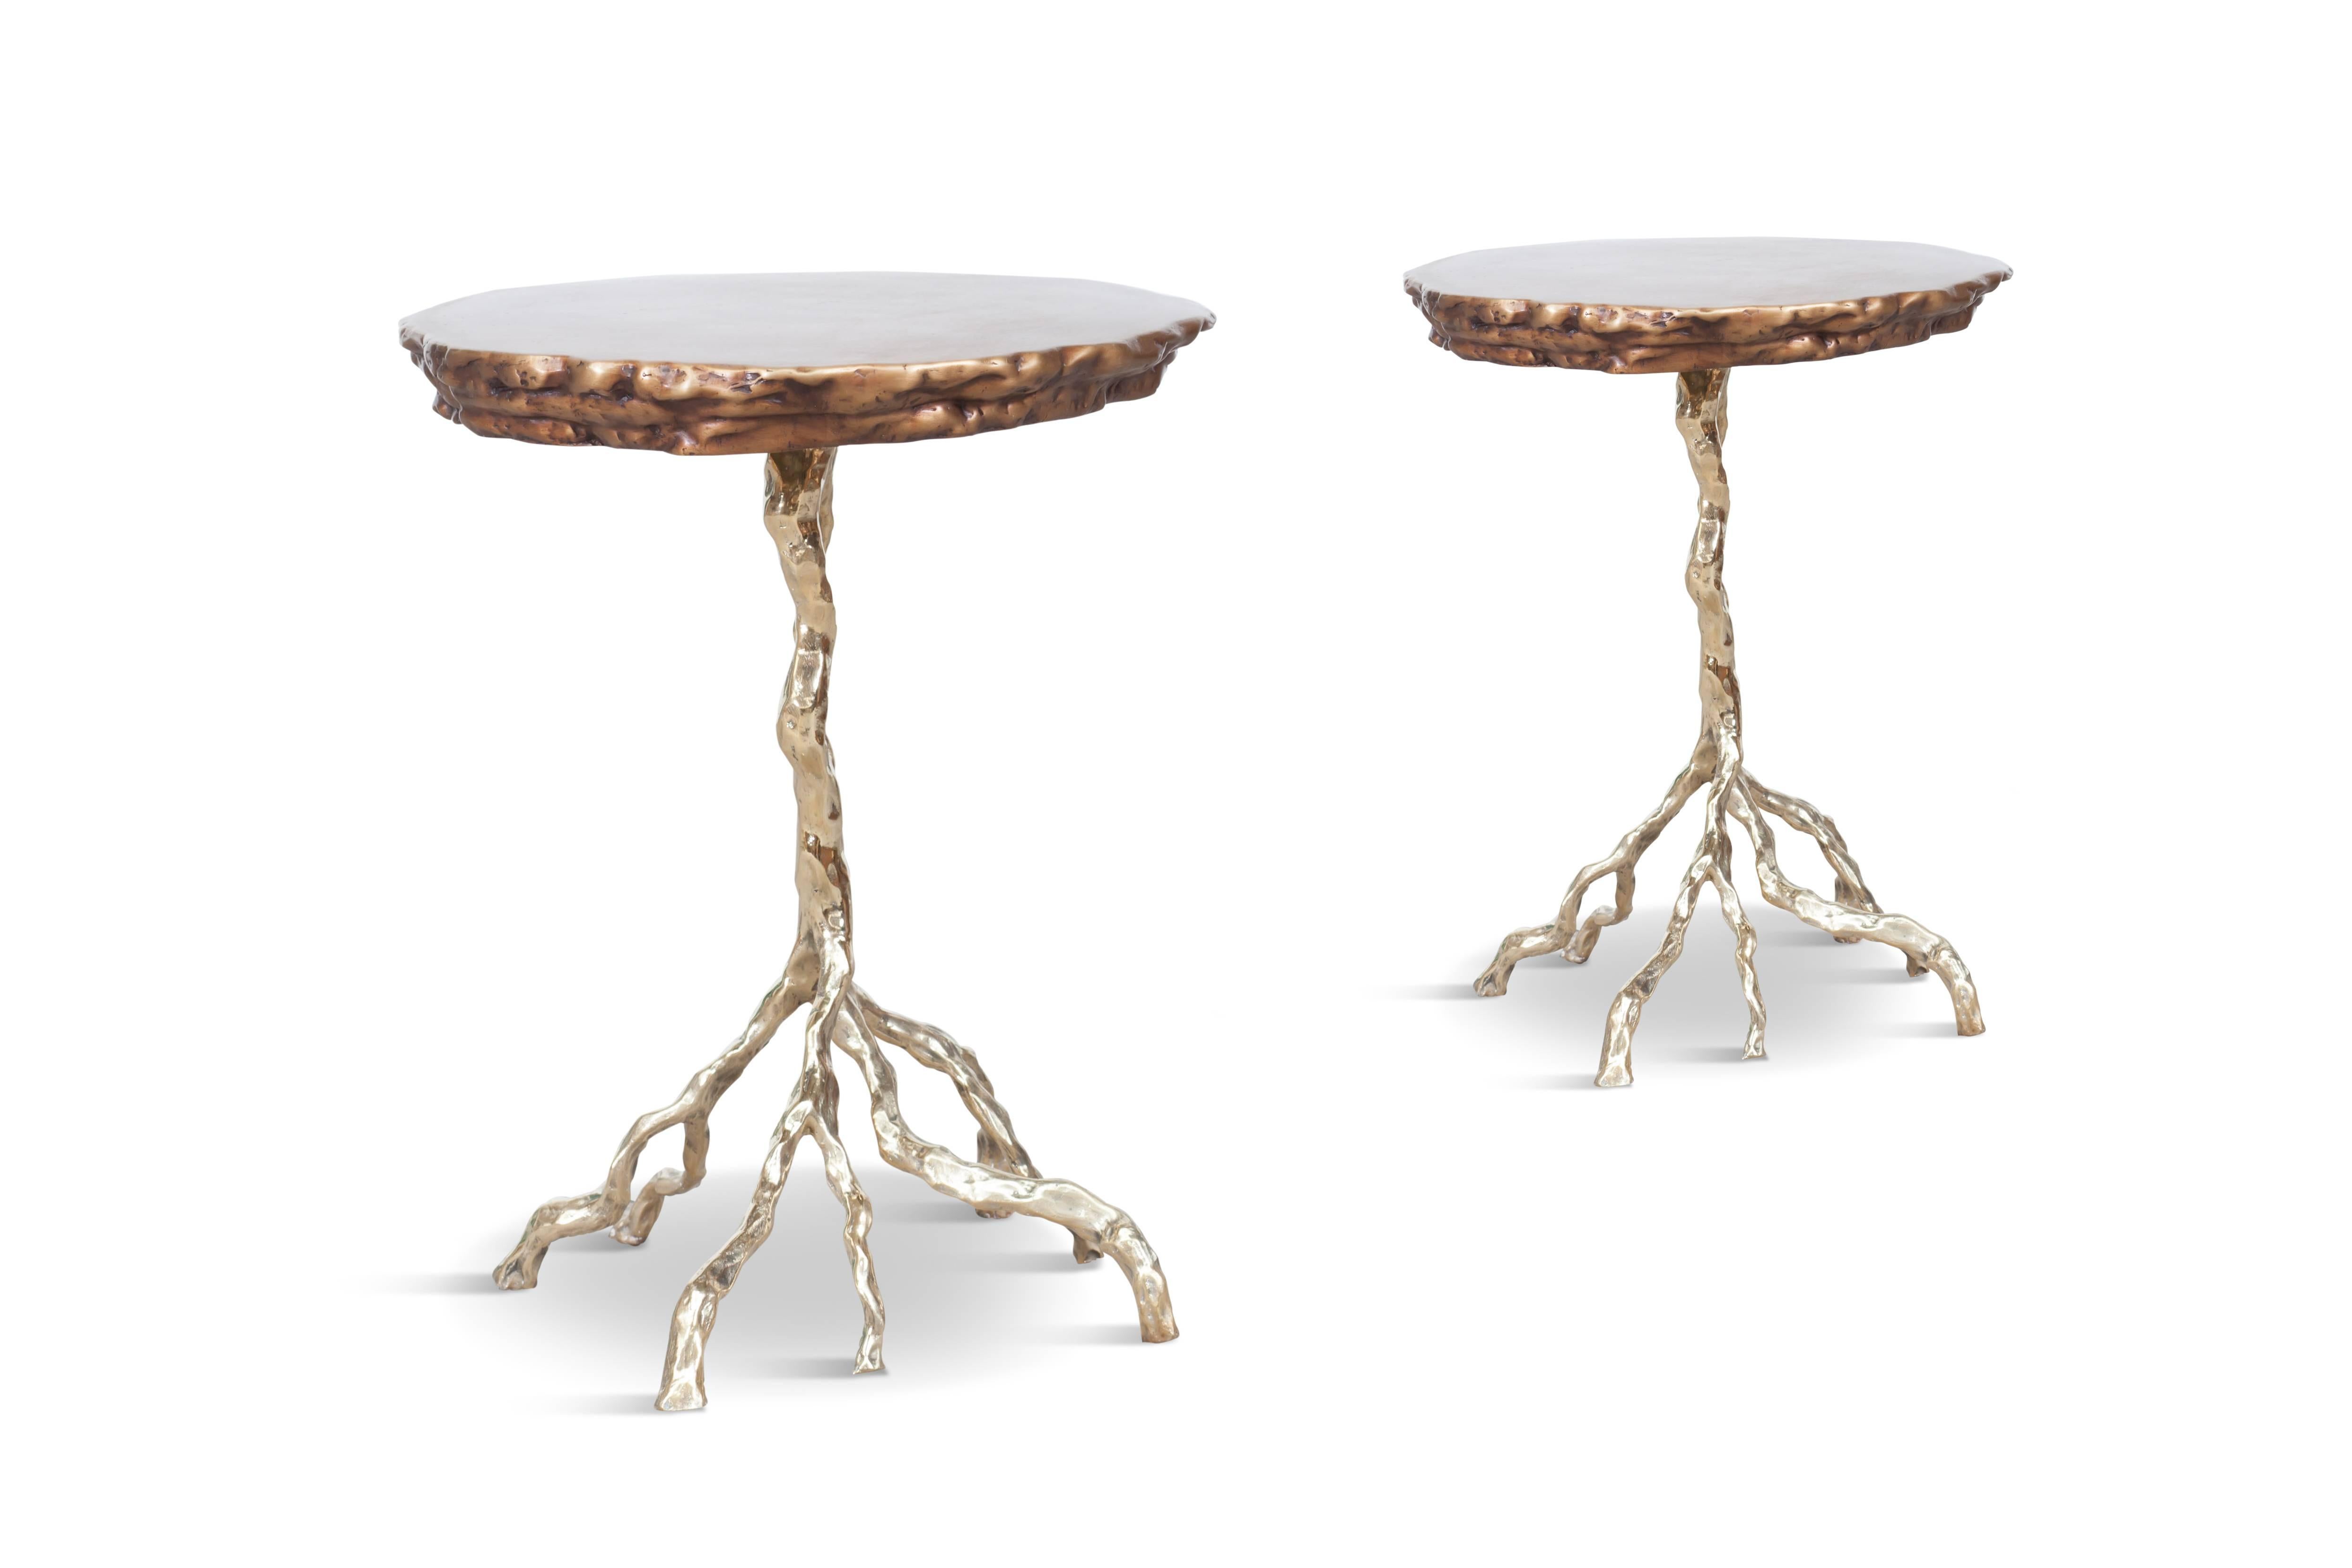 Bronze hand casted and polished “Root” table
Luxury bronze decorative piece that can be used as stools, side tables or nightstands. Our studio designed these pieces as we see them as a perfect fit without current inventory. An High end luxury item